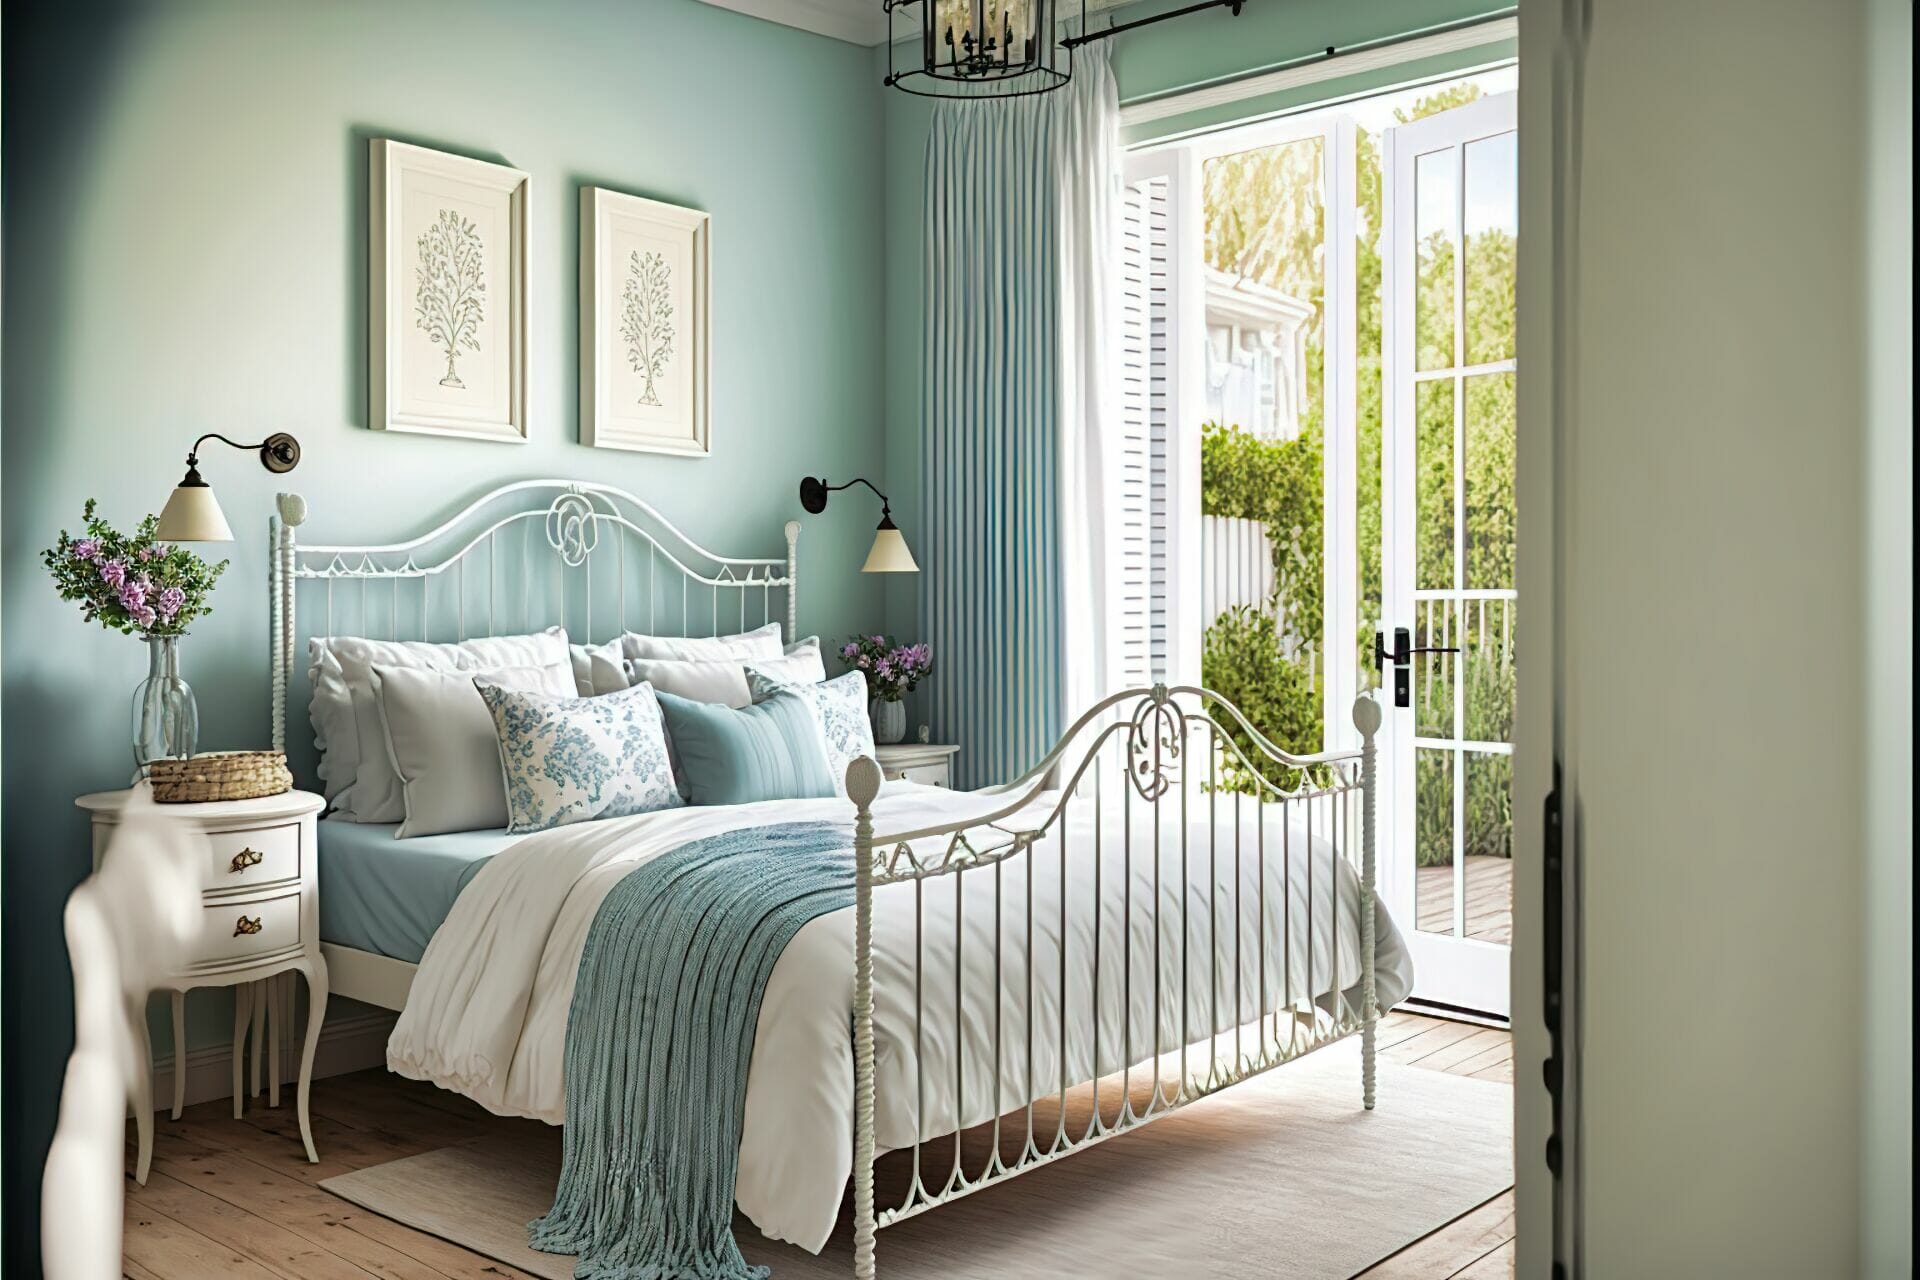 White Iron Bed In A Coastal Chic Bedroom U